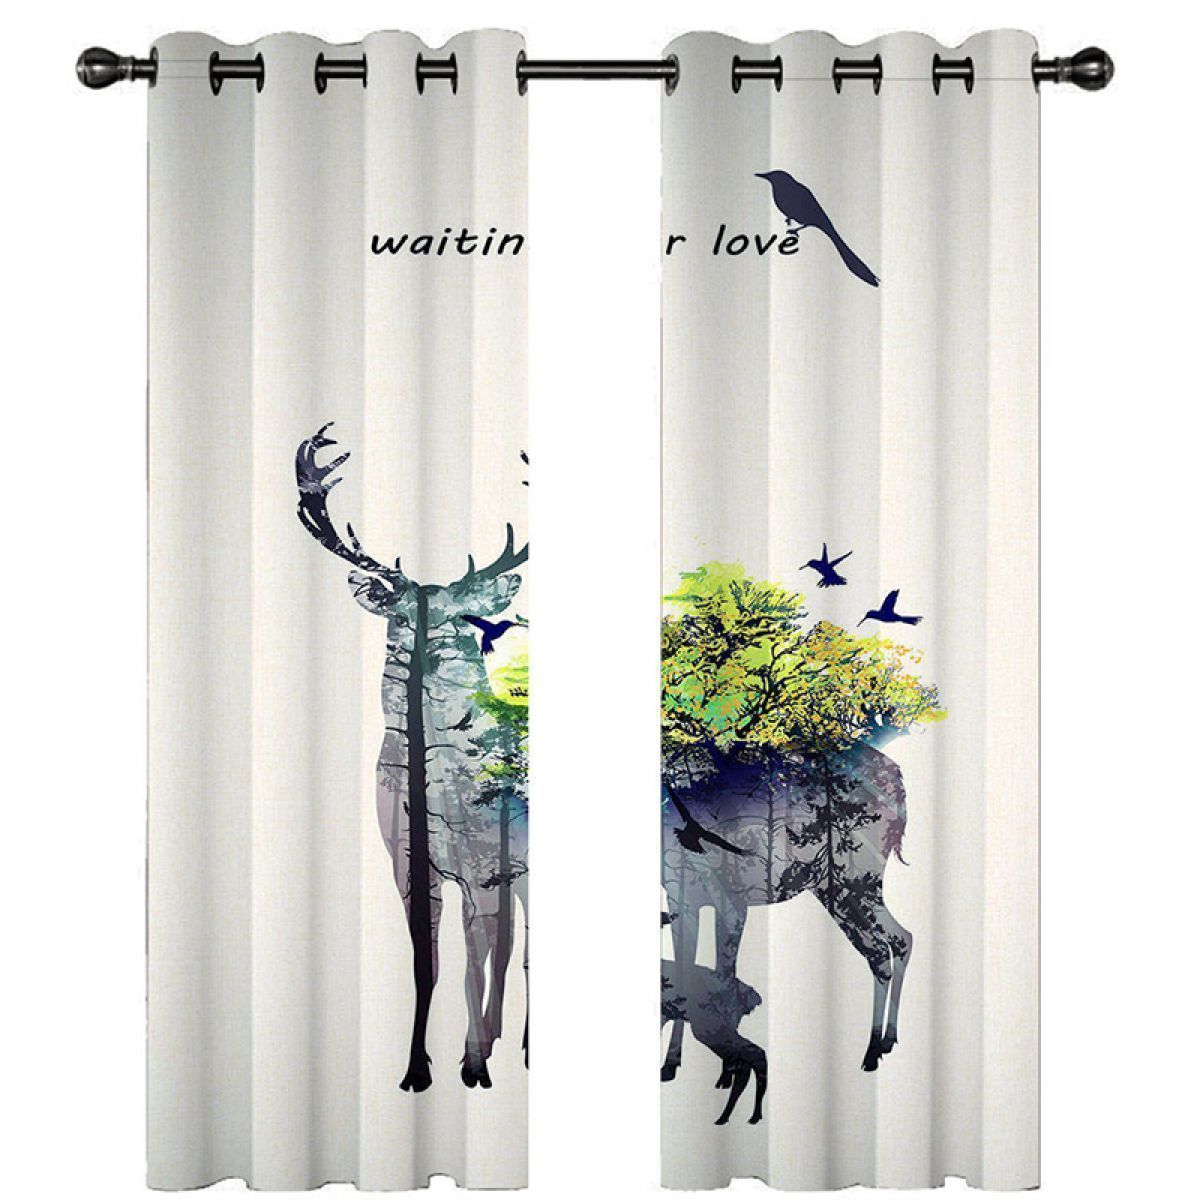 Elks Tree And Birds Waiting For Love Printed Window Curtain Home Decor